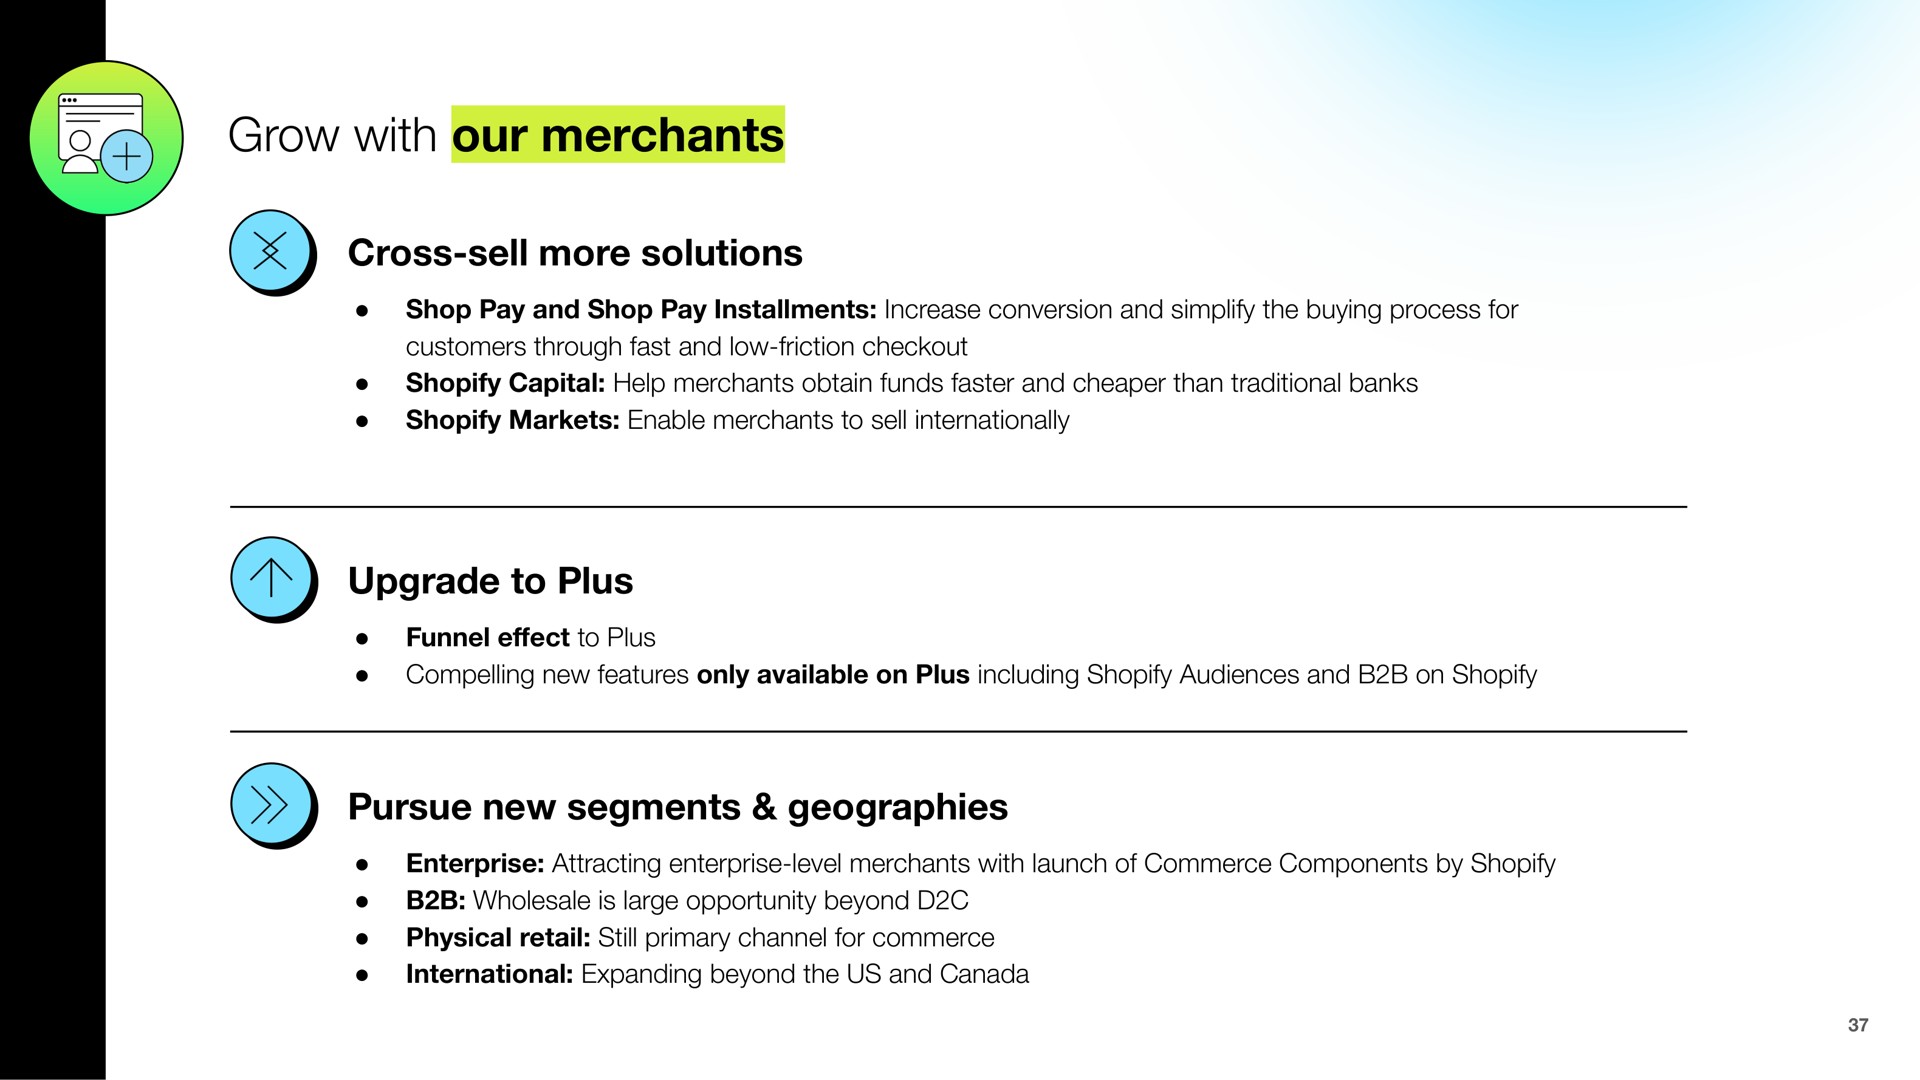 grow with our merchants cross sell more solutions upgrade to plus pursue new segments geographies | Shopify